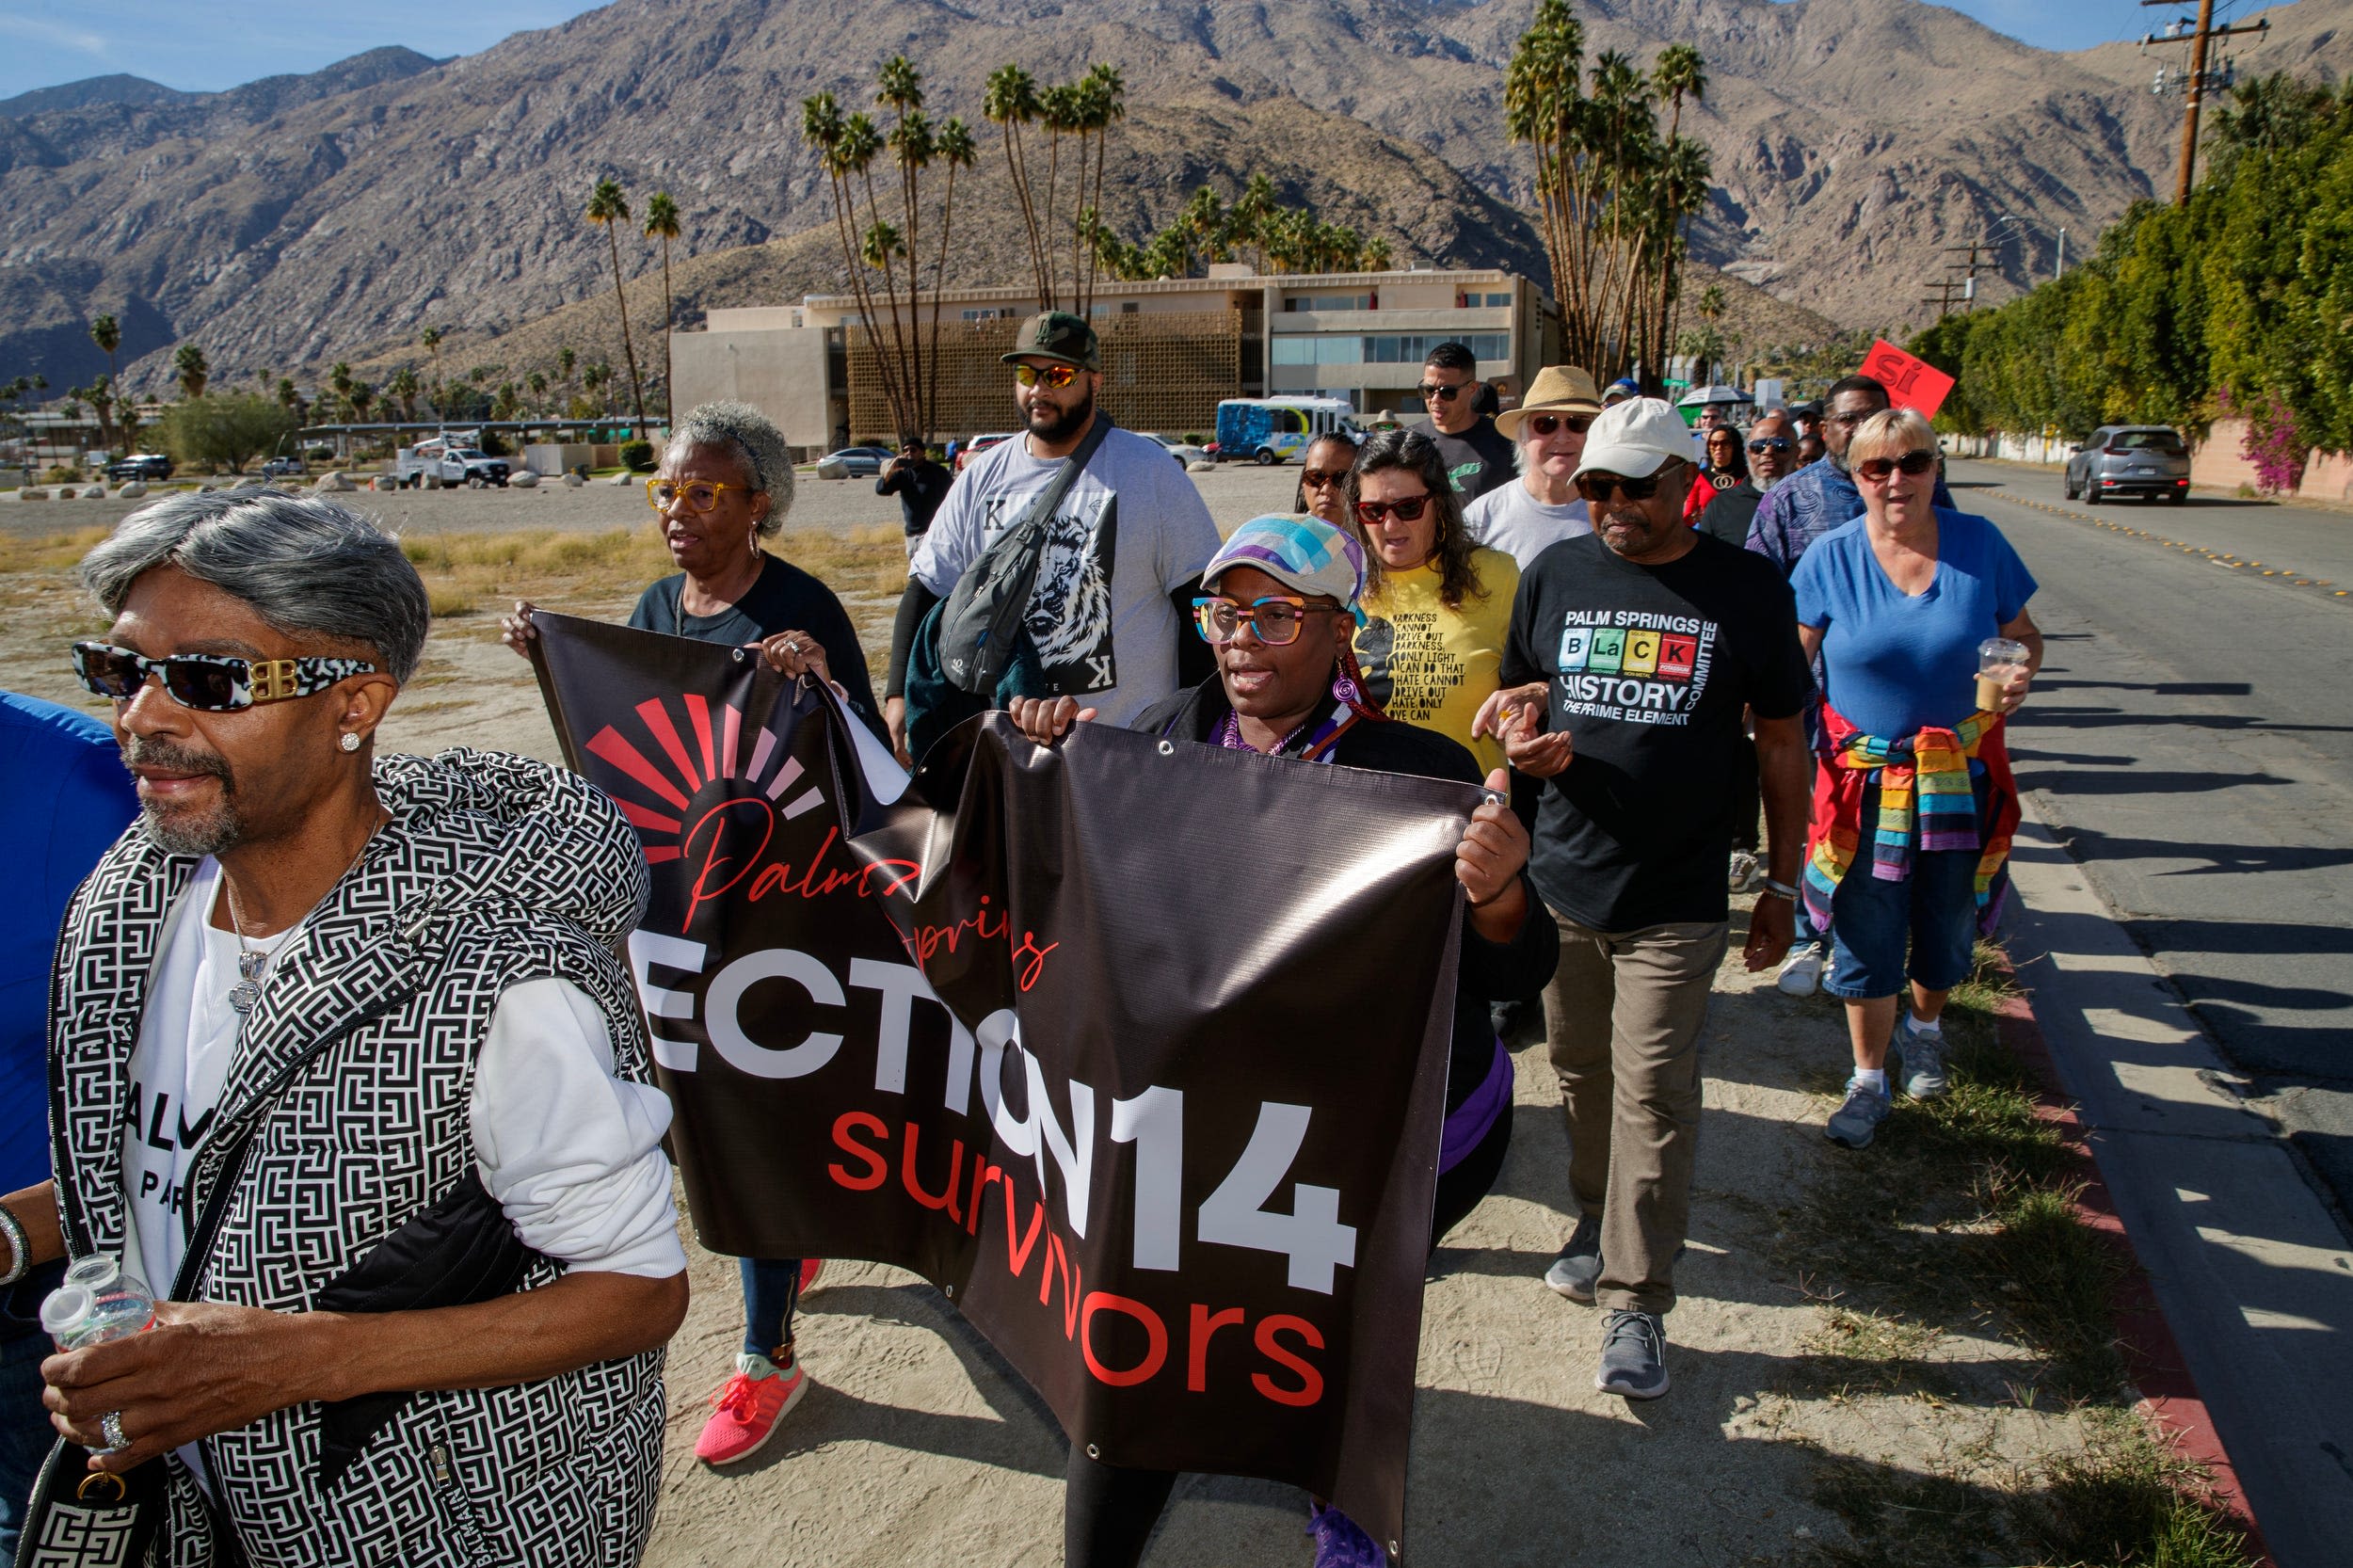 Palm Springs says $105 million request from Section 14 group would ‘bankrupt the city’